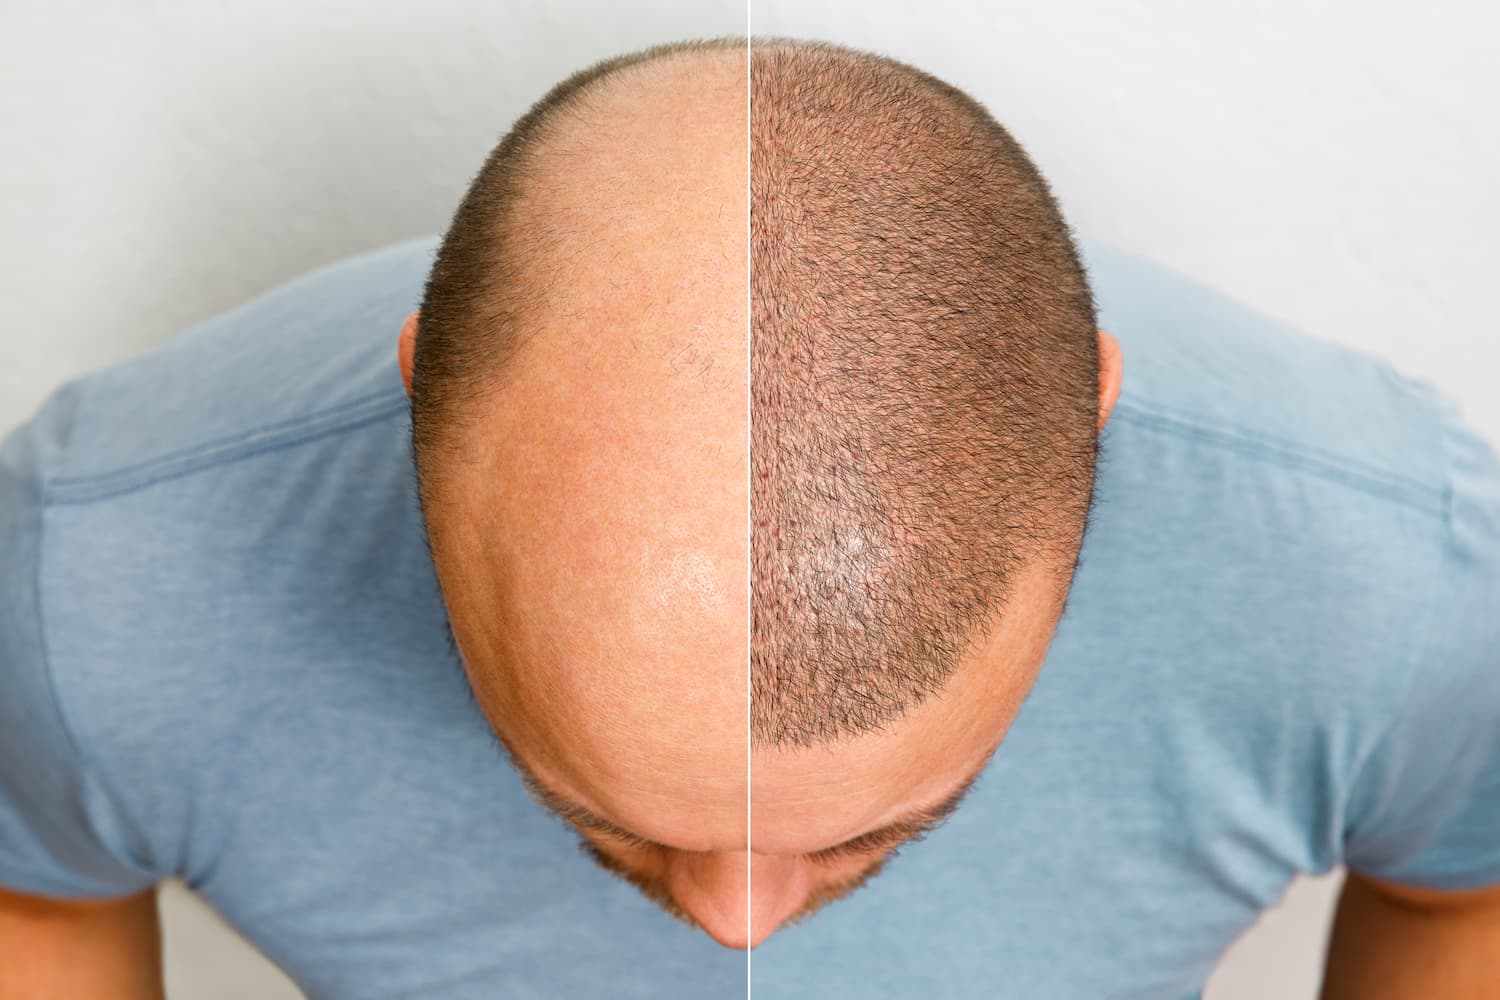 Embrace A New Era Of Confidence: Life-Changing With Hair Transplant After 10 Years